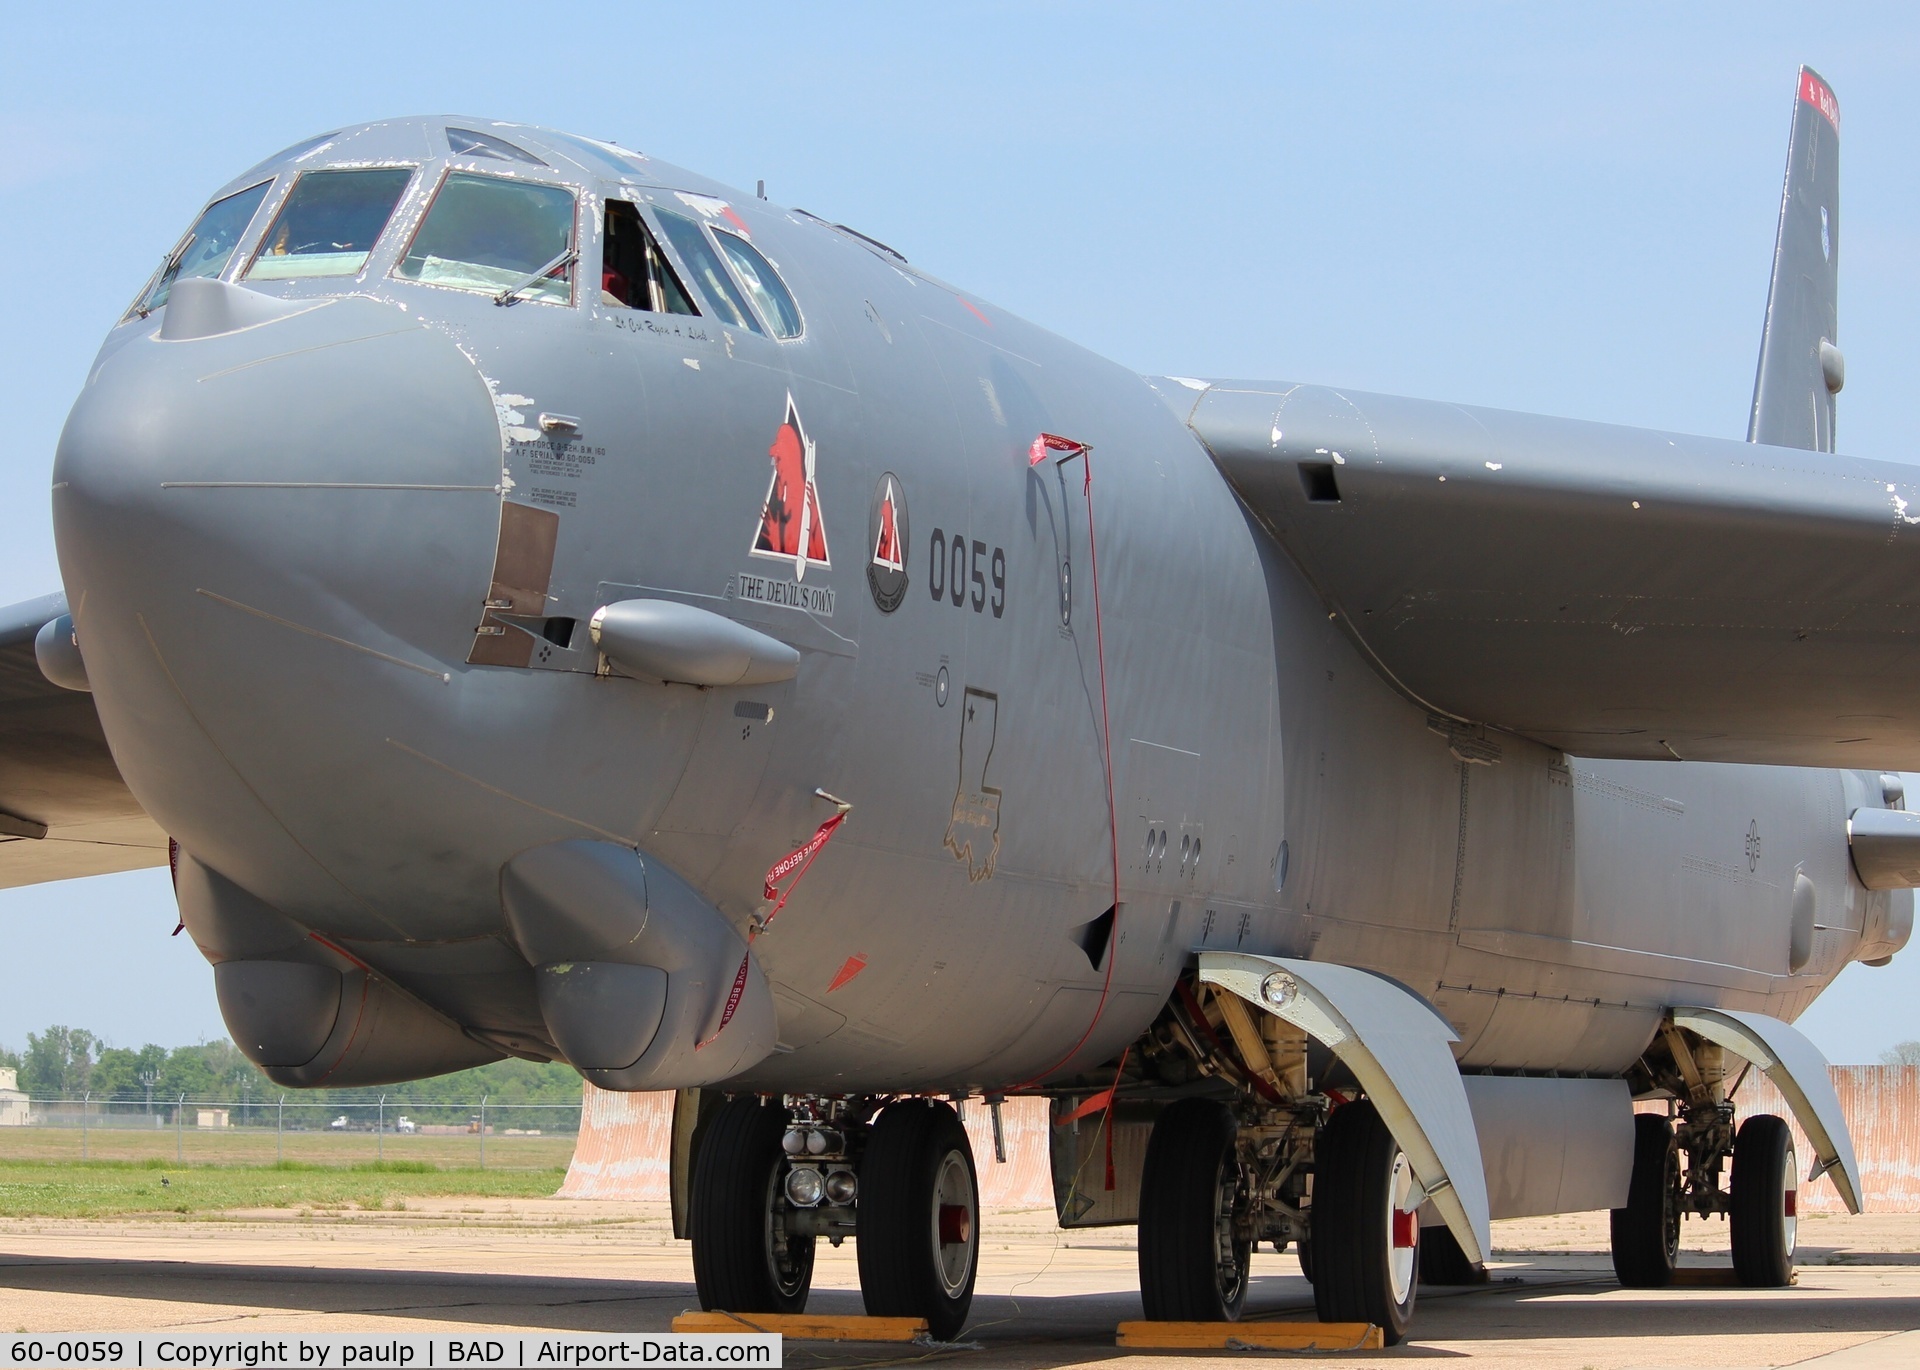 60-0059, 1960 Boeing B-52H Stratofortress C/N 464424, At Barksdale Air Force Base.